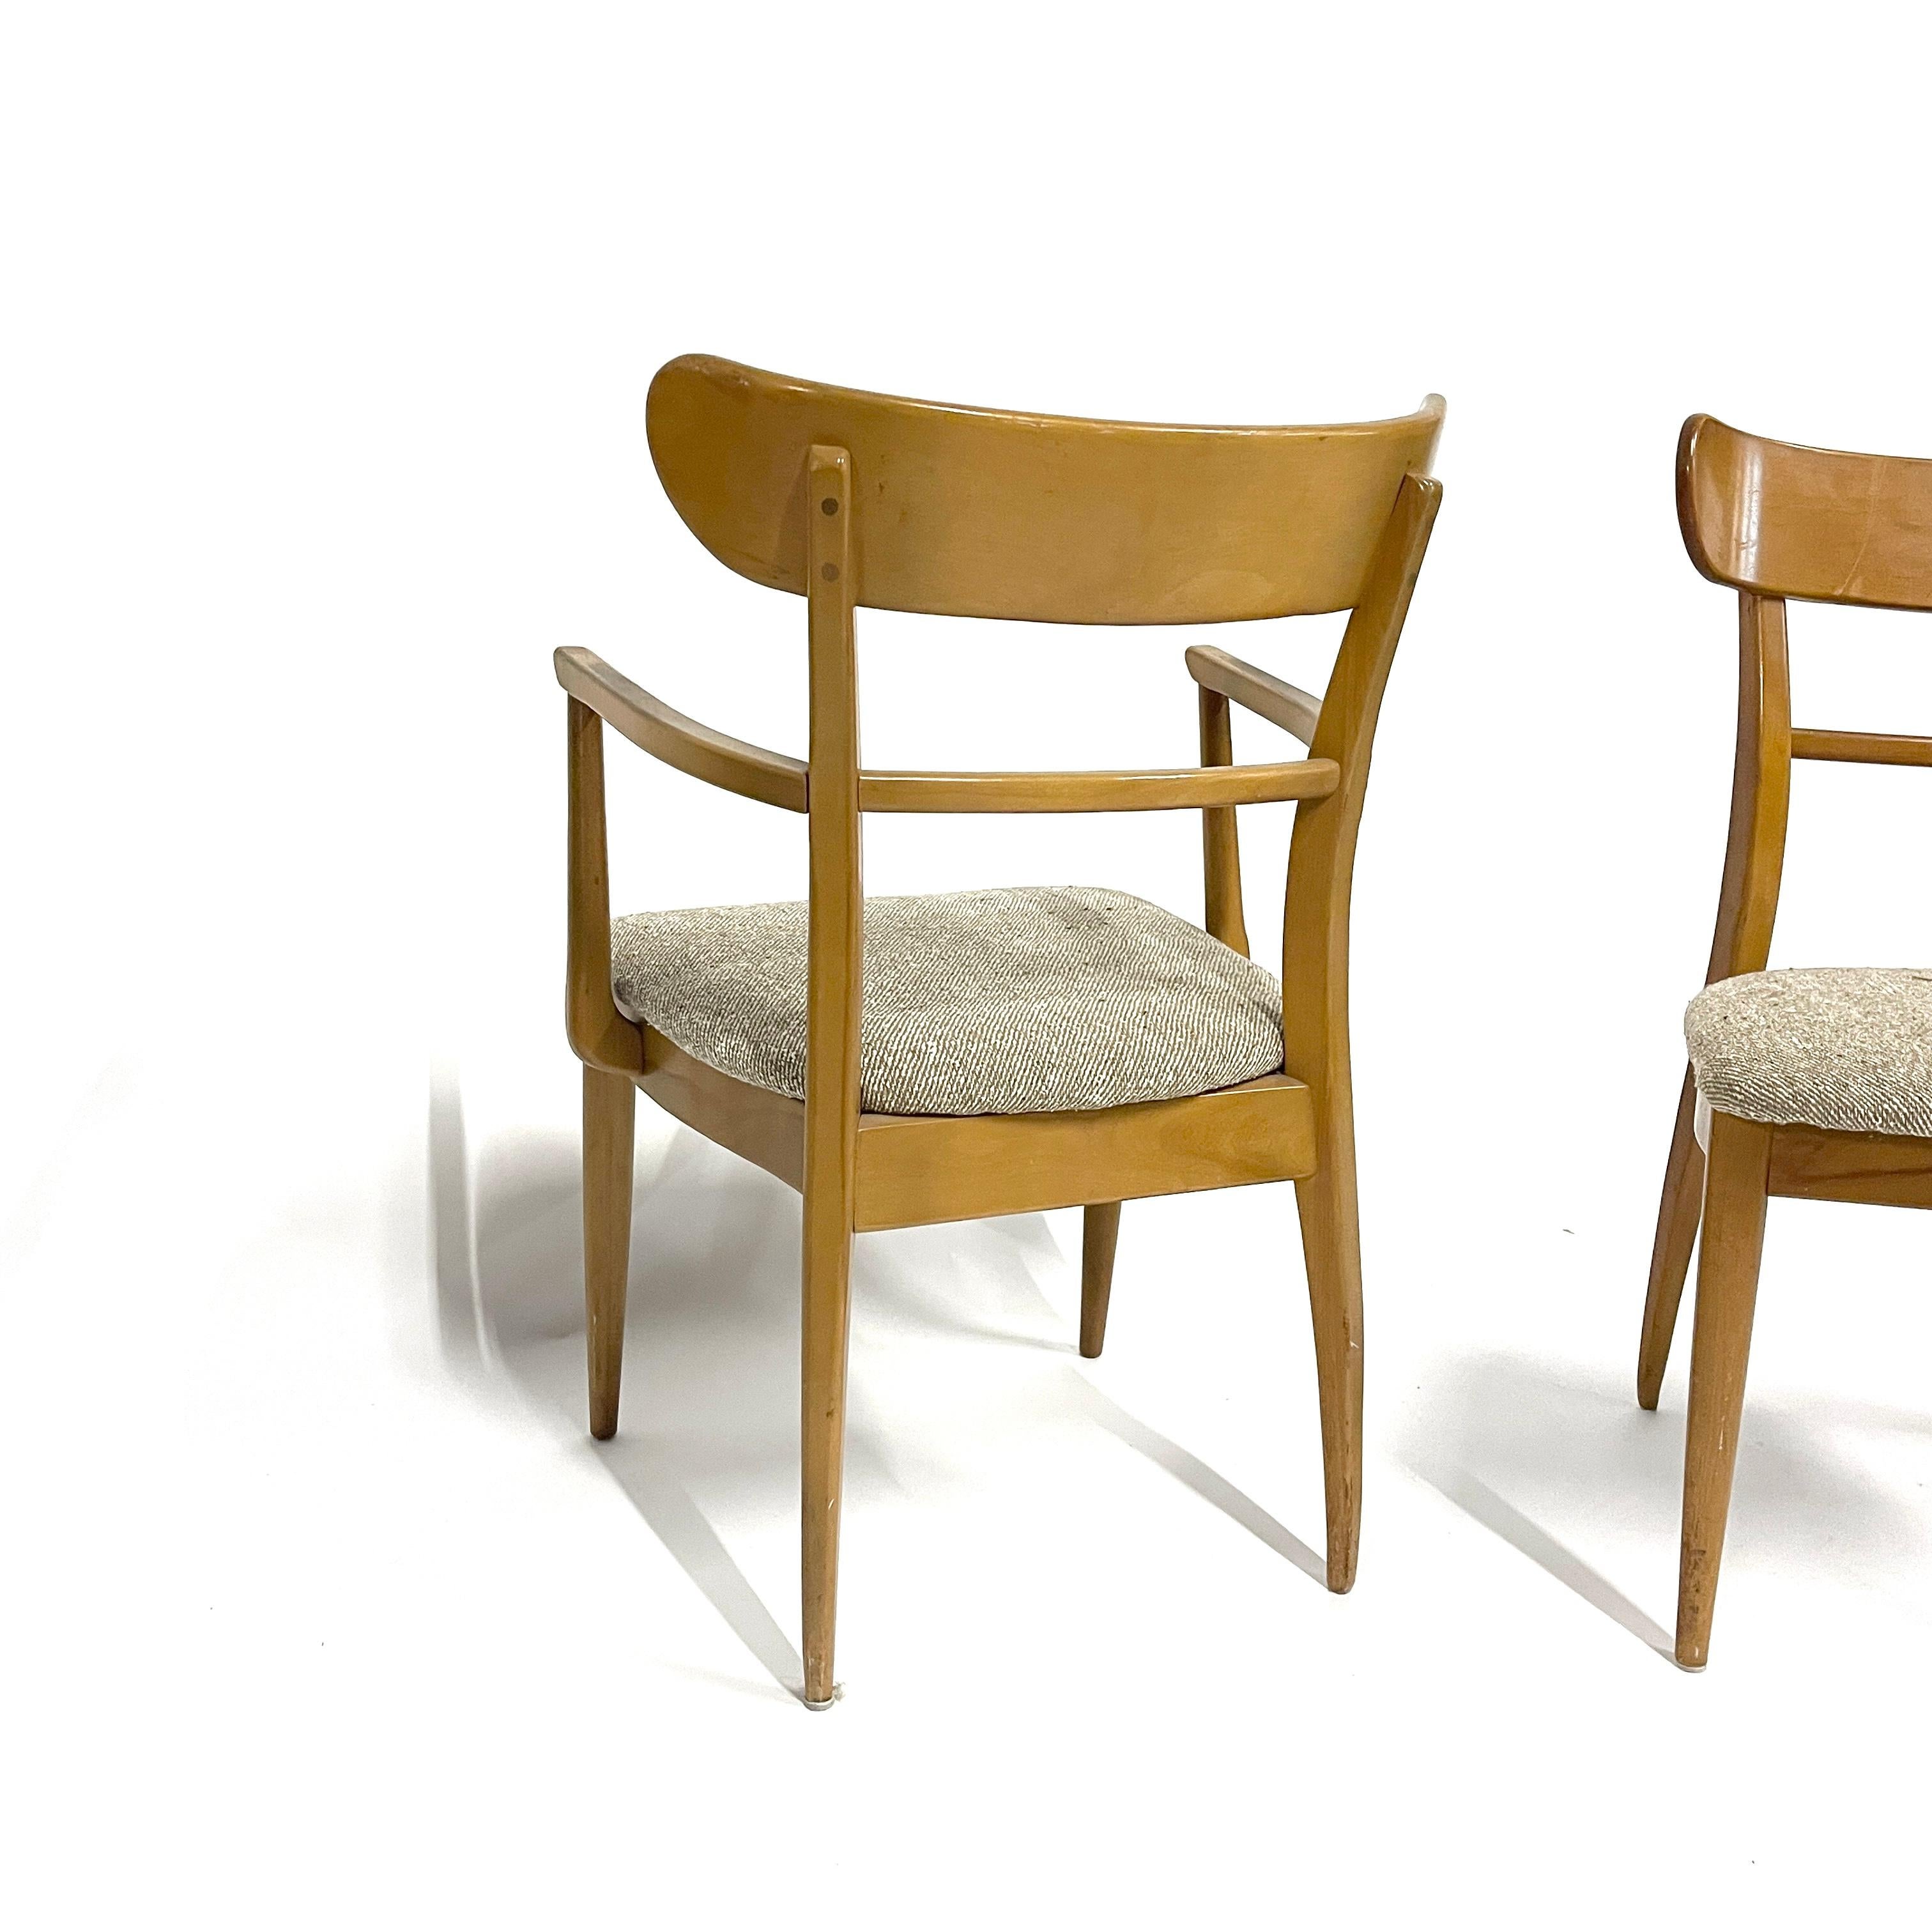 Lovely solid hard rock maple chairs manufactured by Cushman of Vermont. These chairs are quite rare and from a small line produced by Cushman called 